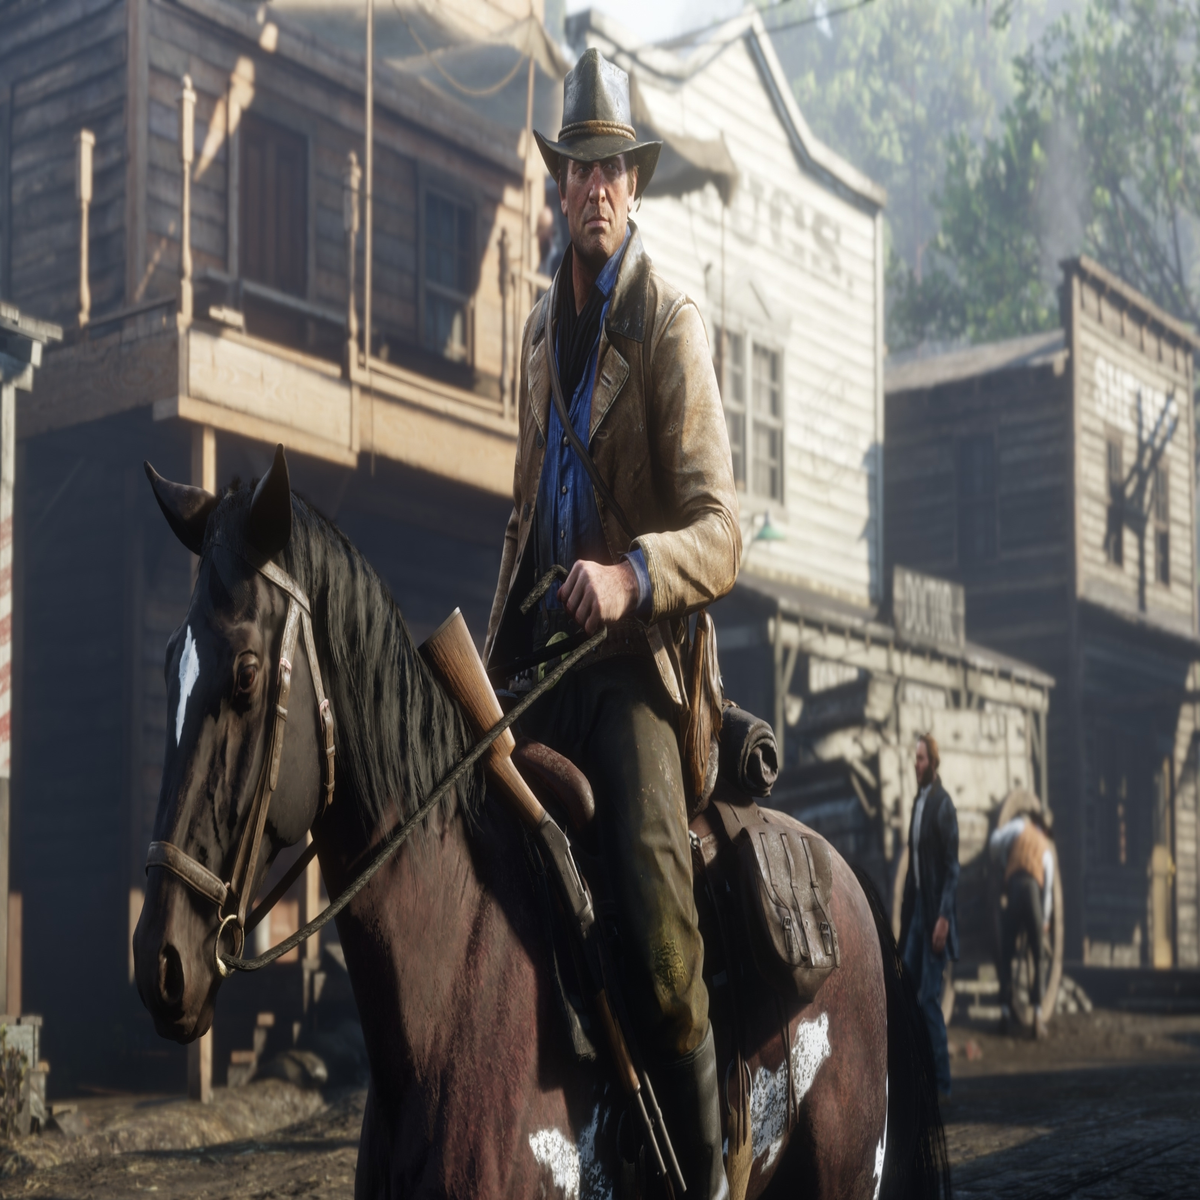 Red Dead Redemption 2 PC Release Time TODAY: What time does RDR2